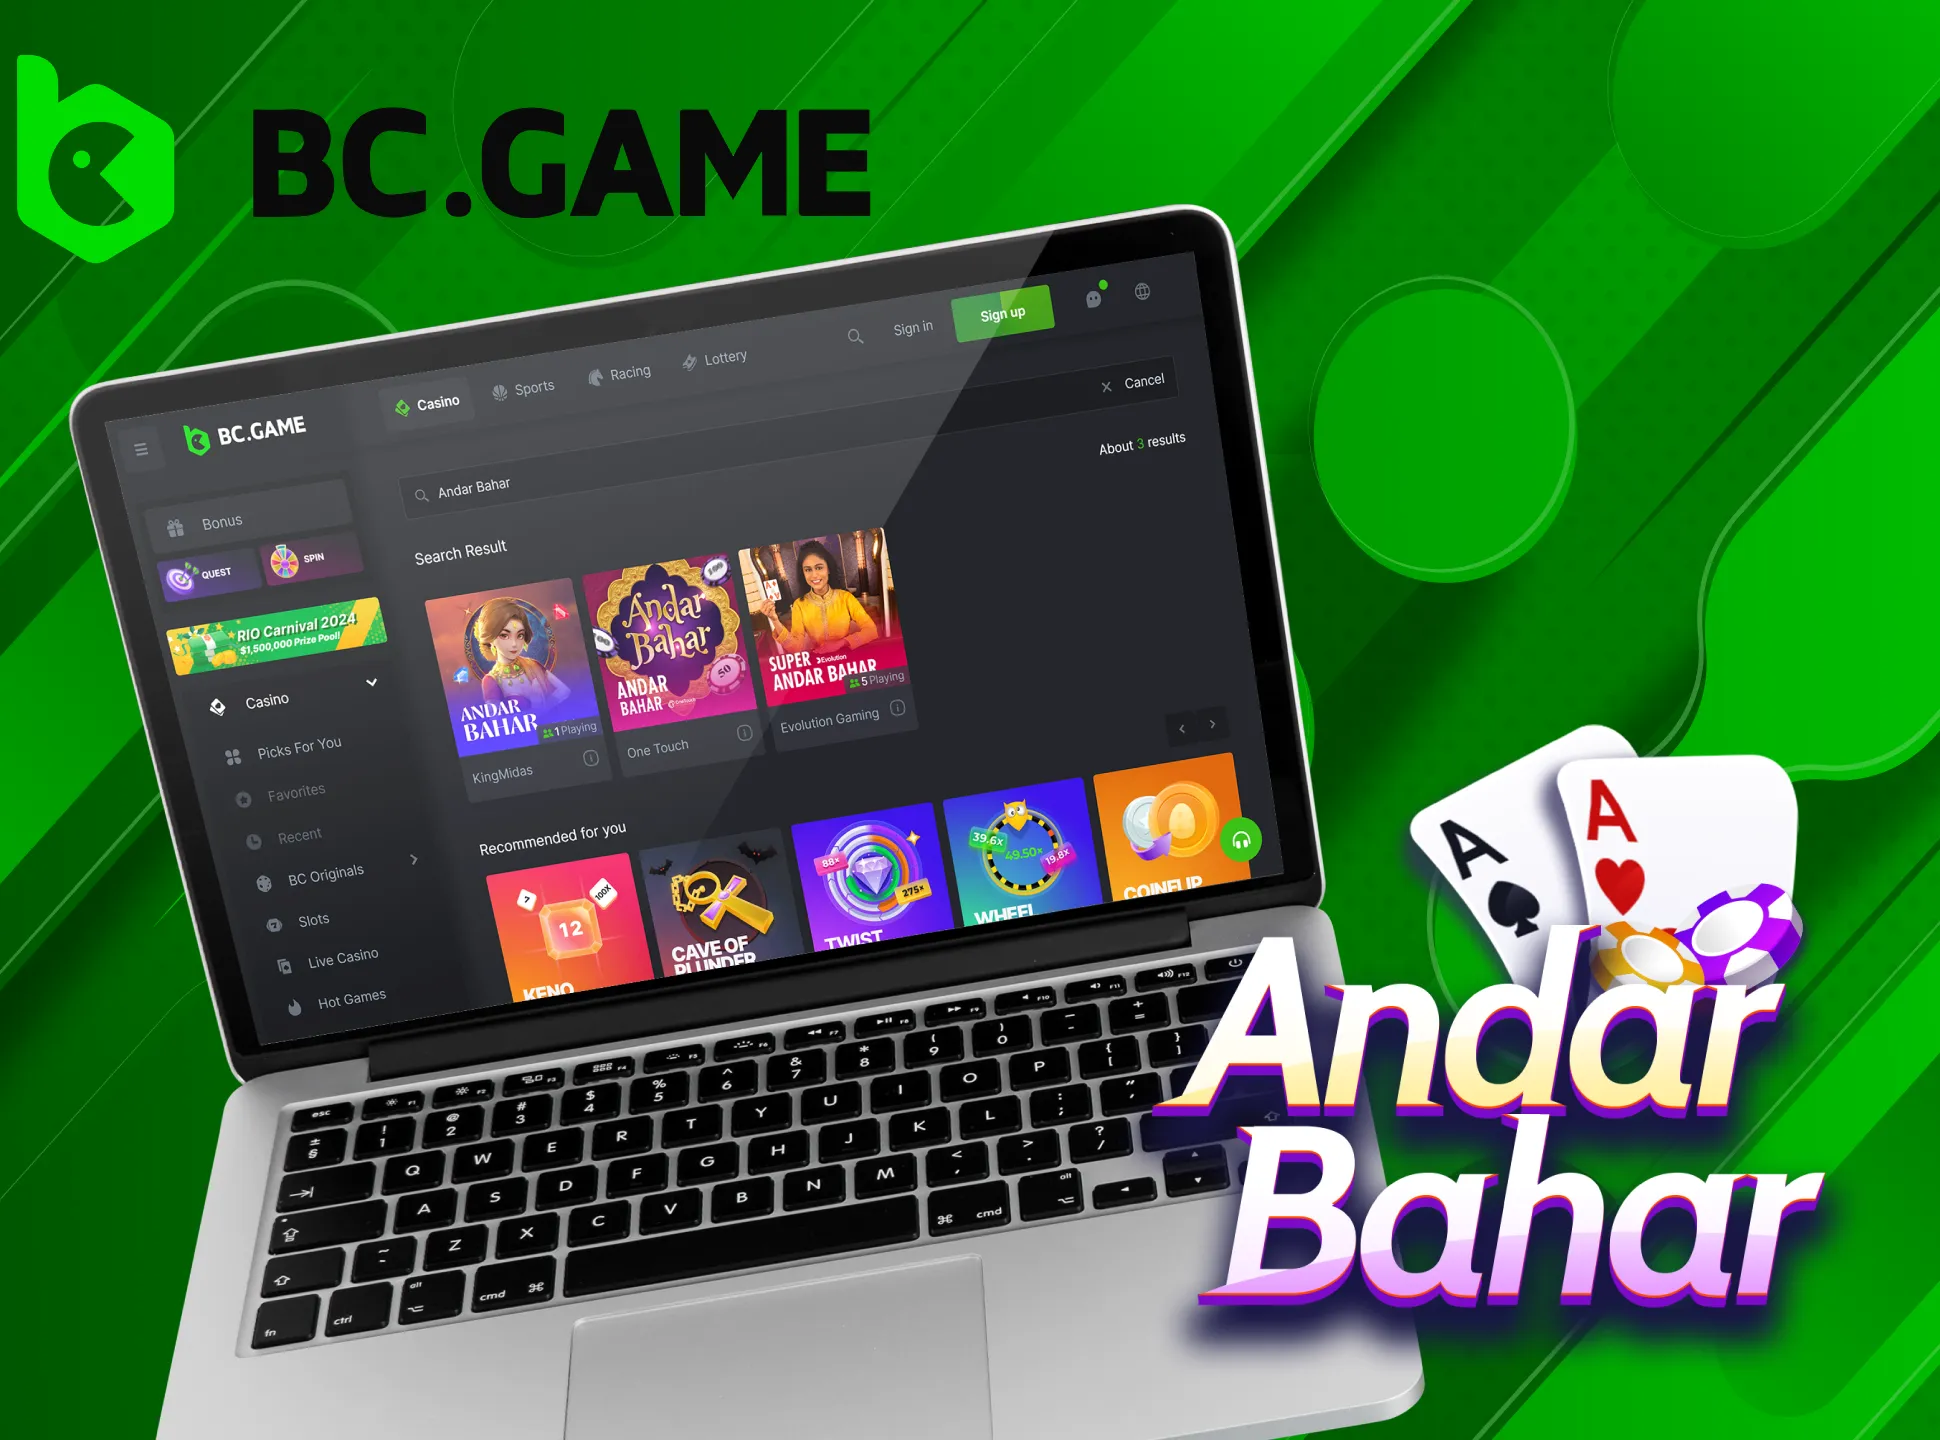 Test your luck and fortune when playing Andar Bahar from BC Game Casino.